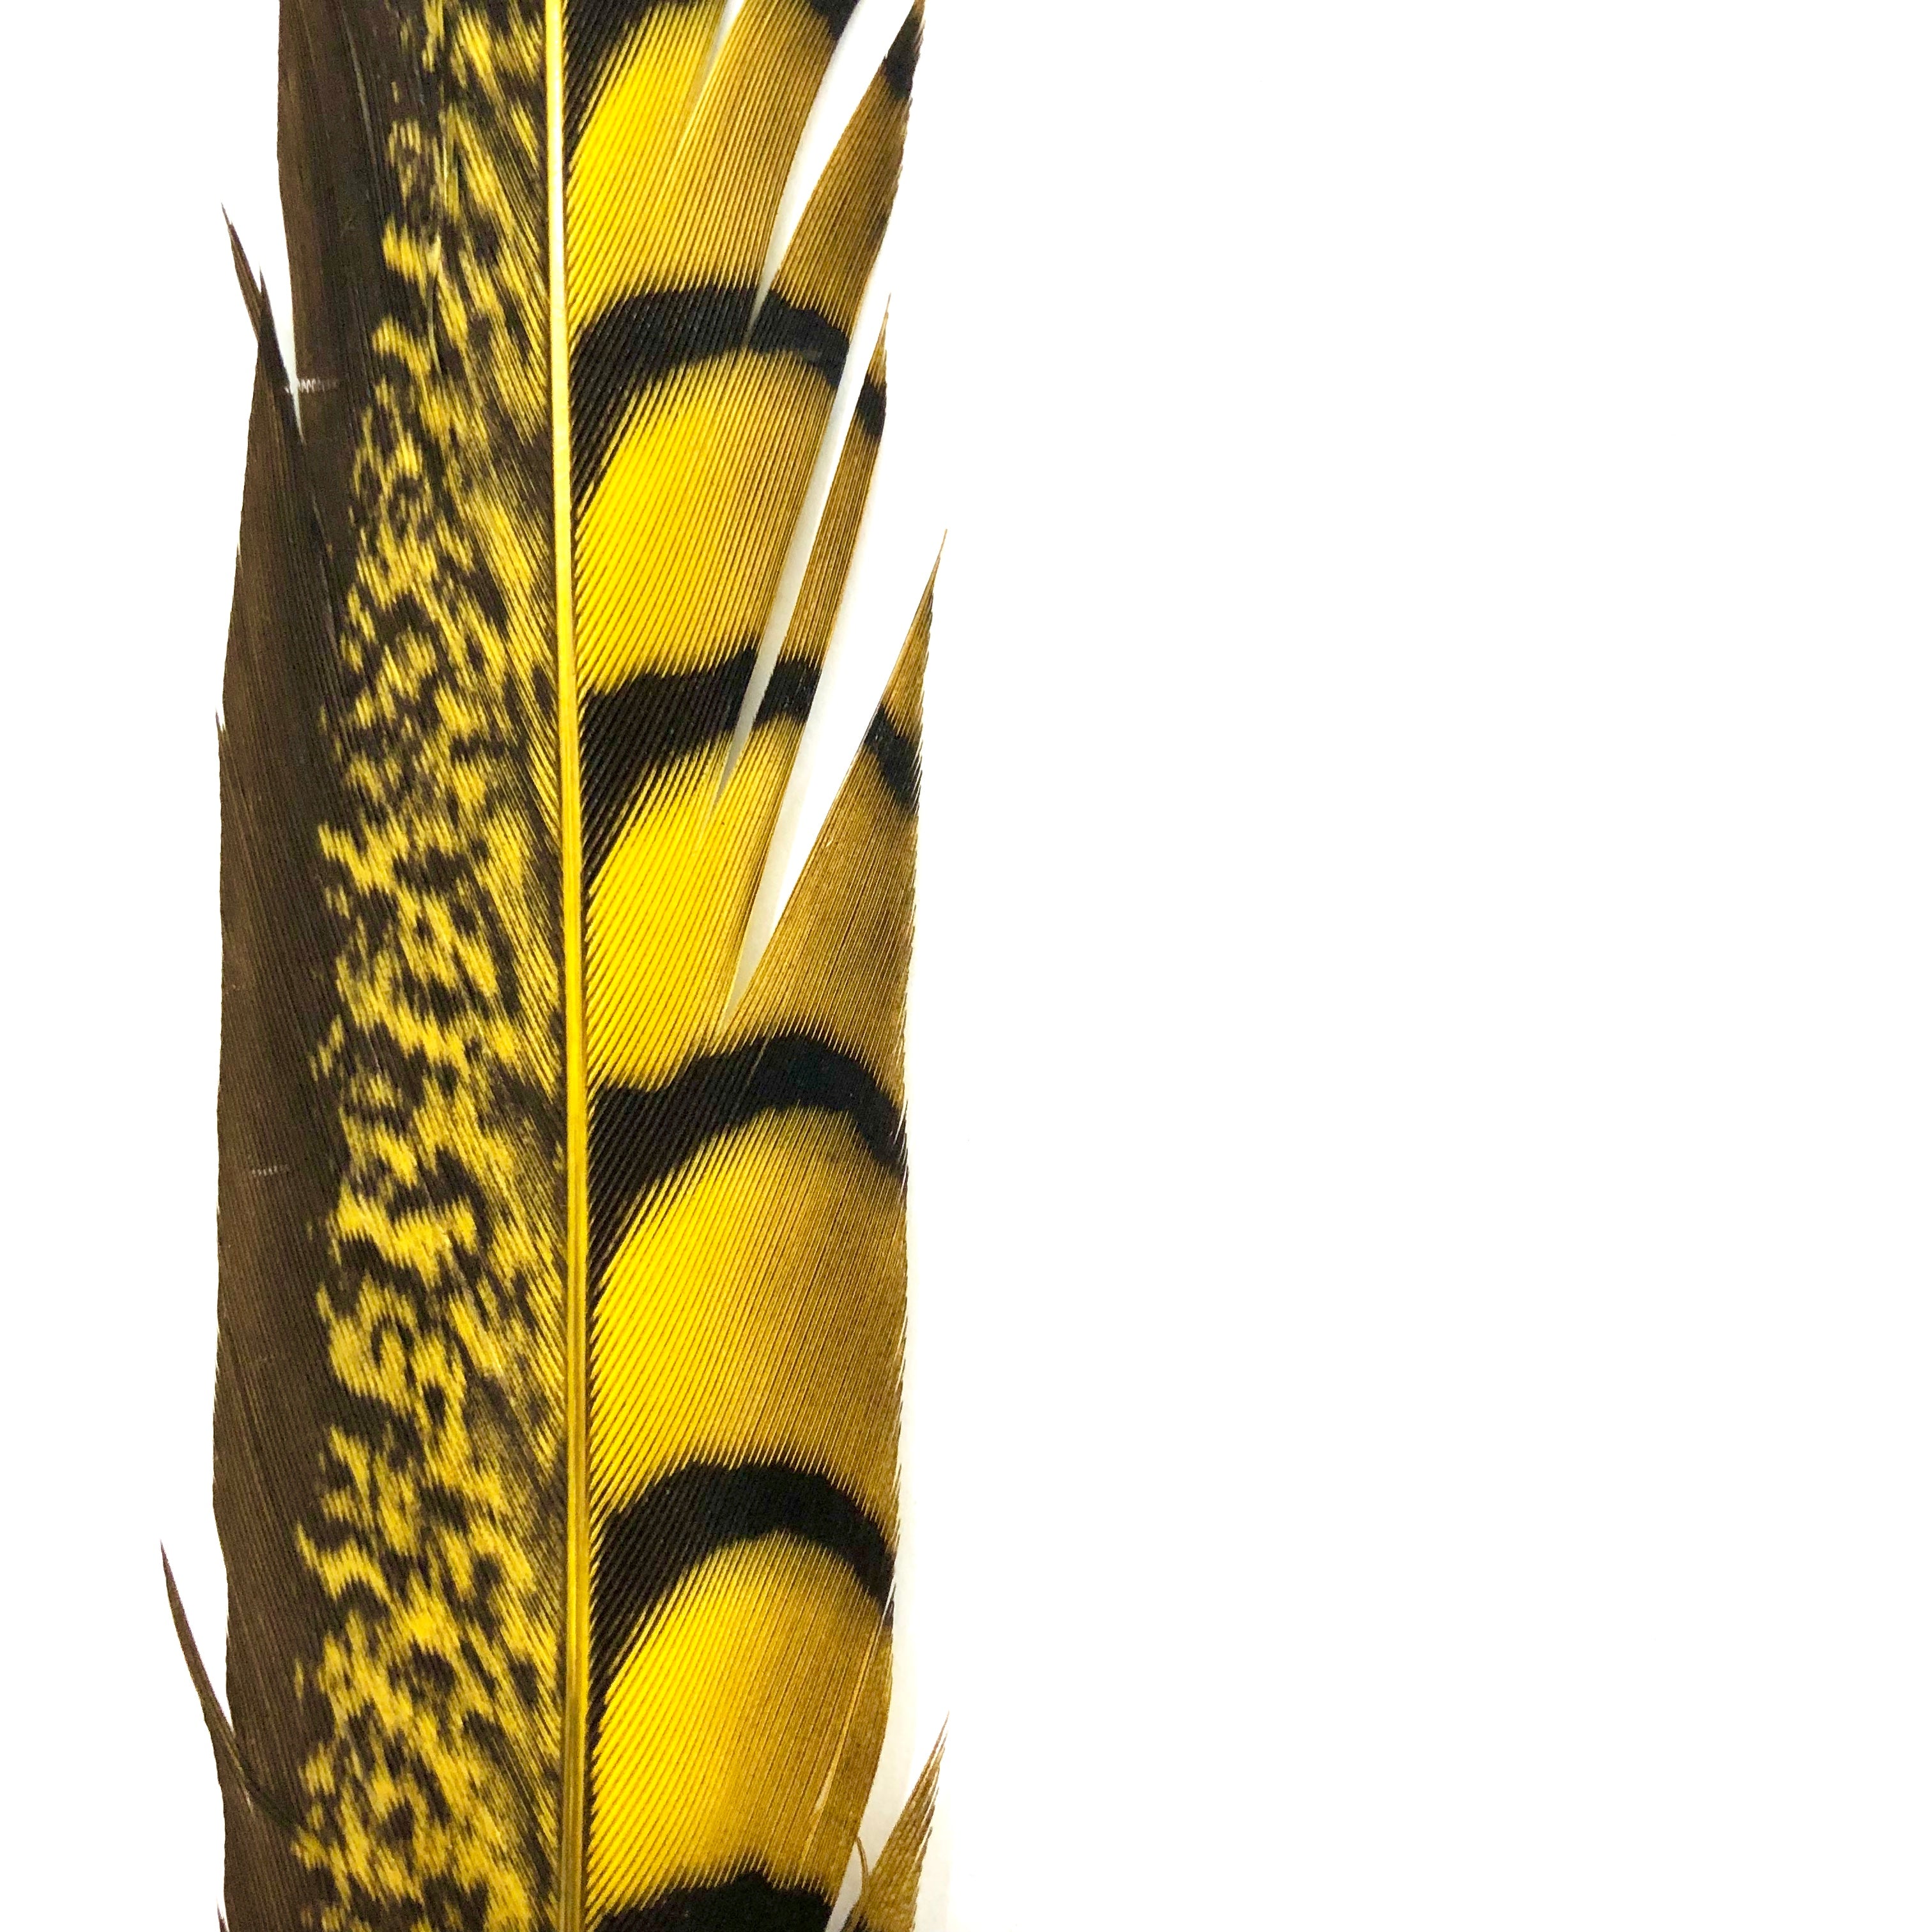 20" to 30" Lady Amherst Pheasant Side Tail Feather - Yellow ((SECONDS))